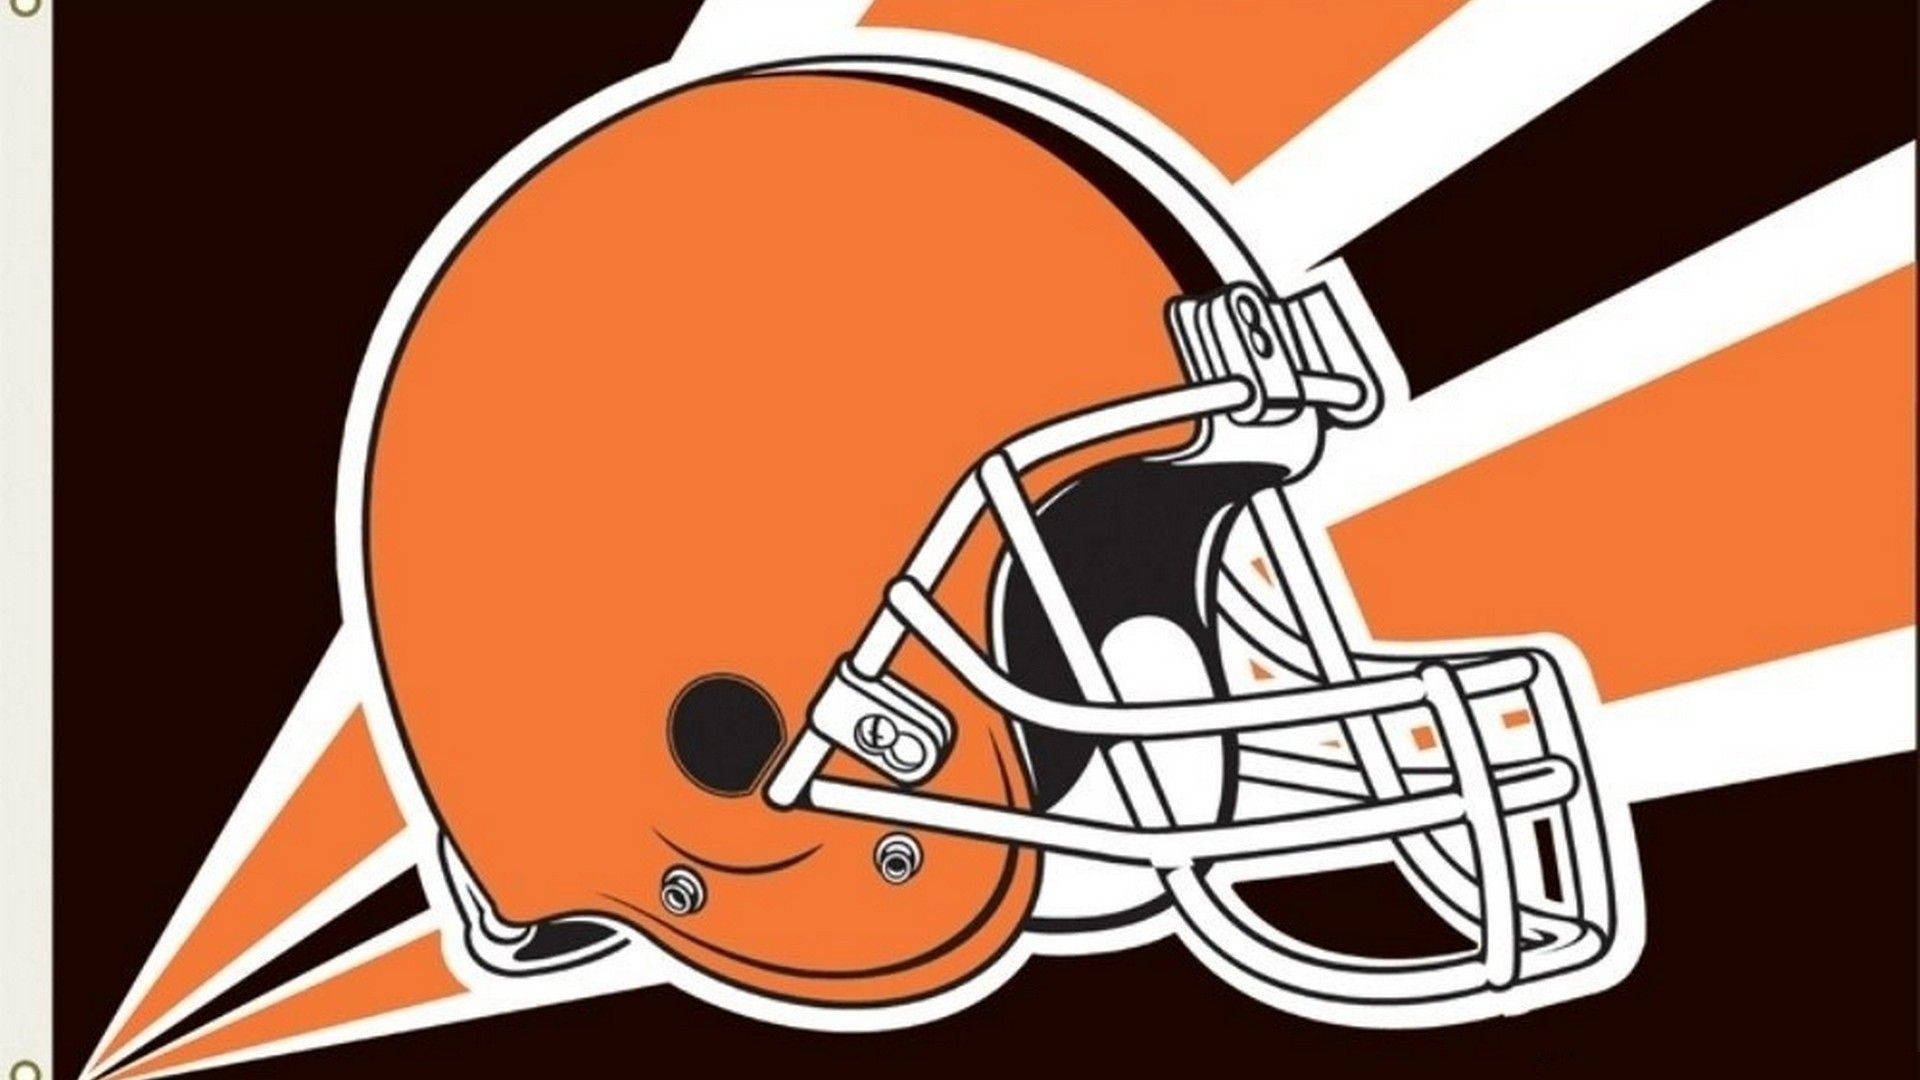 Sporty Cleveland Browns